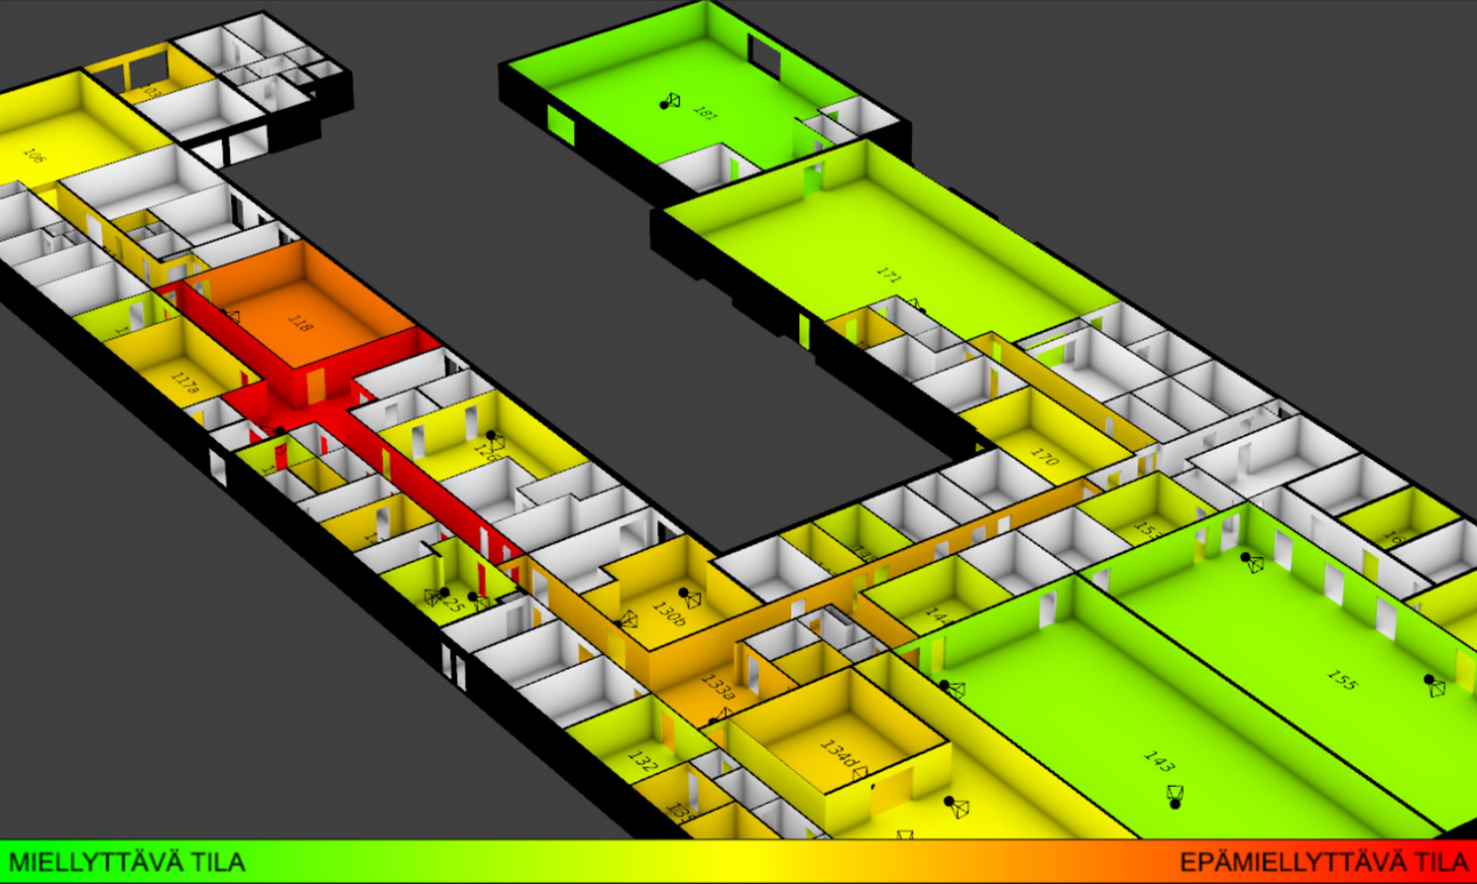 This image portrays one way of processing and visualizing user data collected with Maptionnaire. The green end of the spectrum displays what people have perceived as pleasant places and the red end highlights unpleasant bits of the facility. This quite effectively demonstrates where the application of redesign resources creates most value. Modeling and programming: Petri Kangassalo, Aalto Built Environment Laboratory.